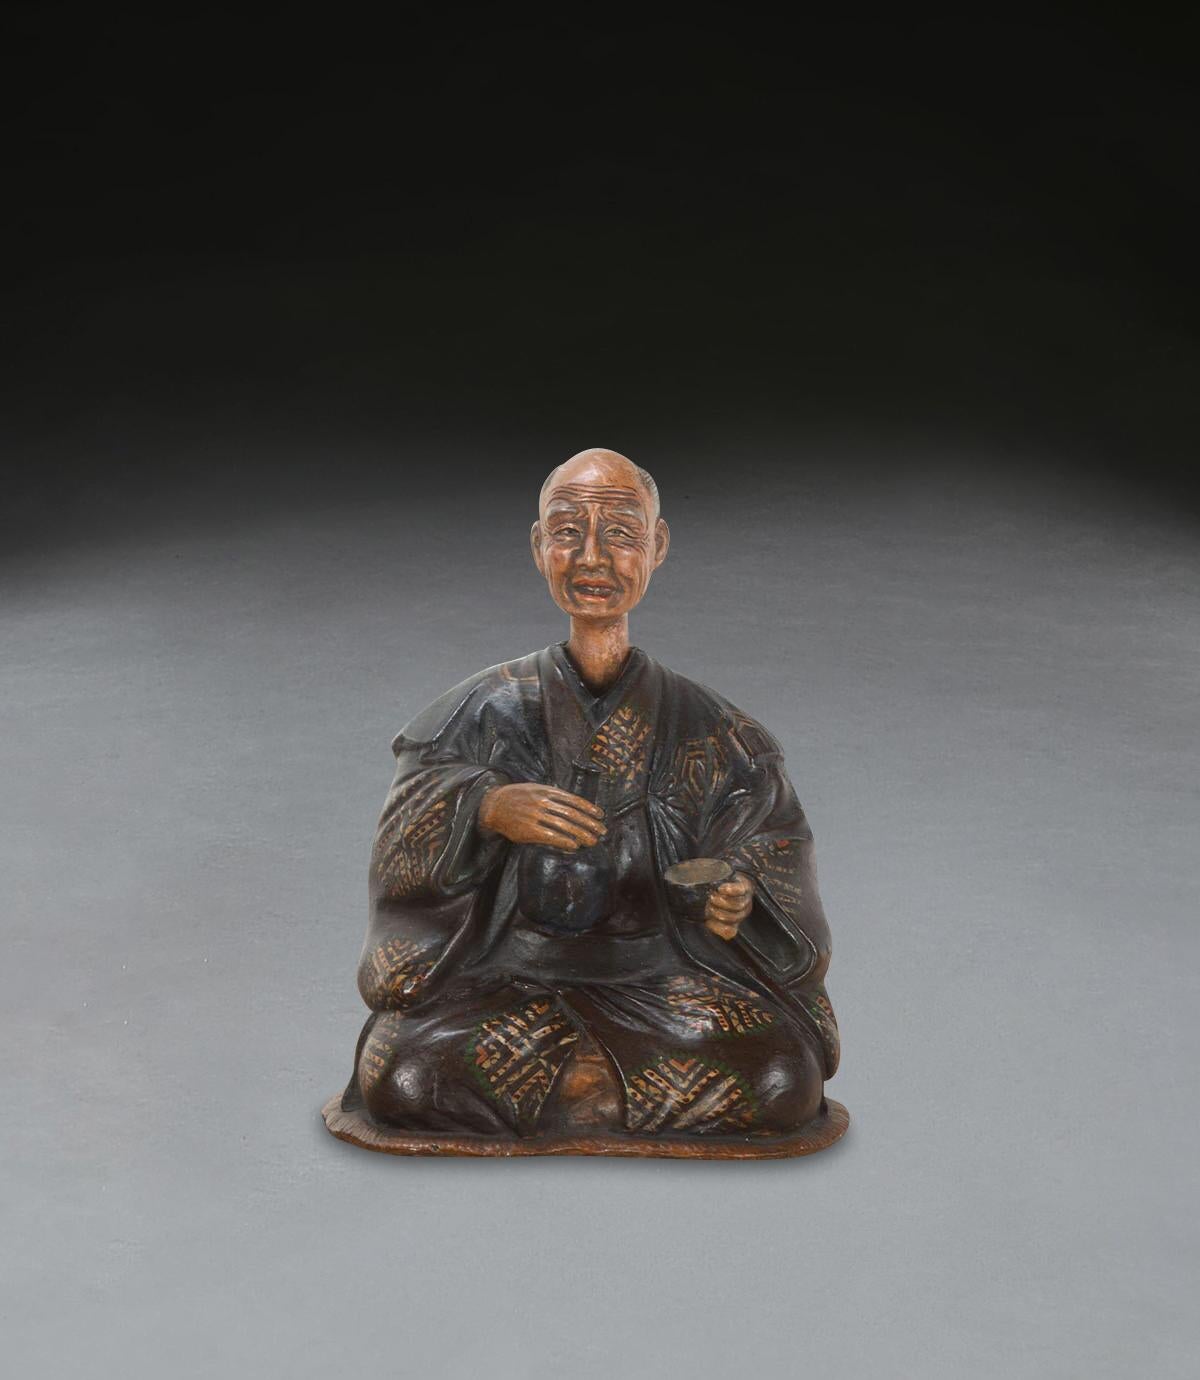 A rare C19th English pottery figure of a seated Japanese gentleman in traditional robes, with a nodding head which is lead weighted inside to make his head rock, with a bottle and cup in his hands. All still retaining its original decoration. Circa